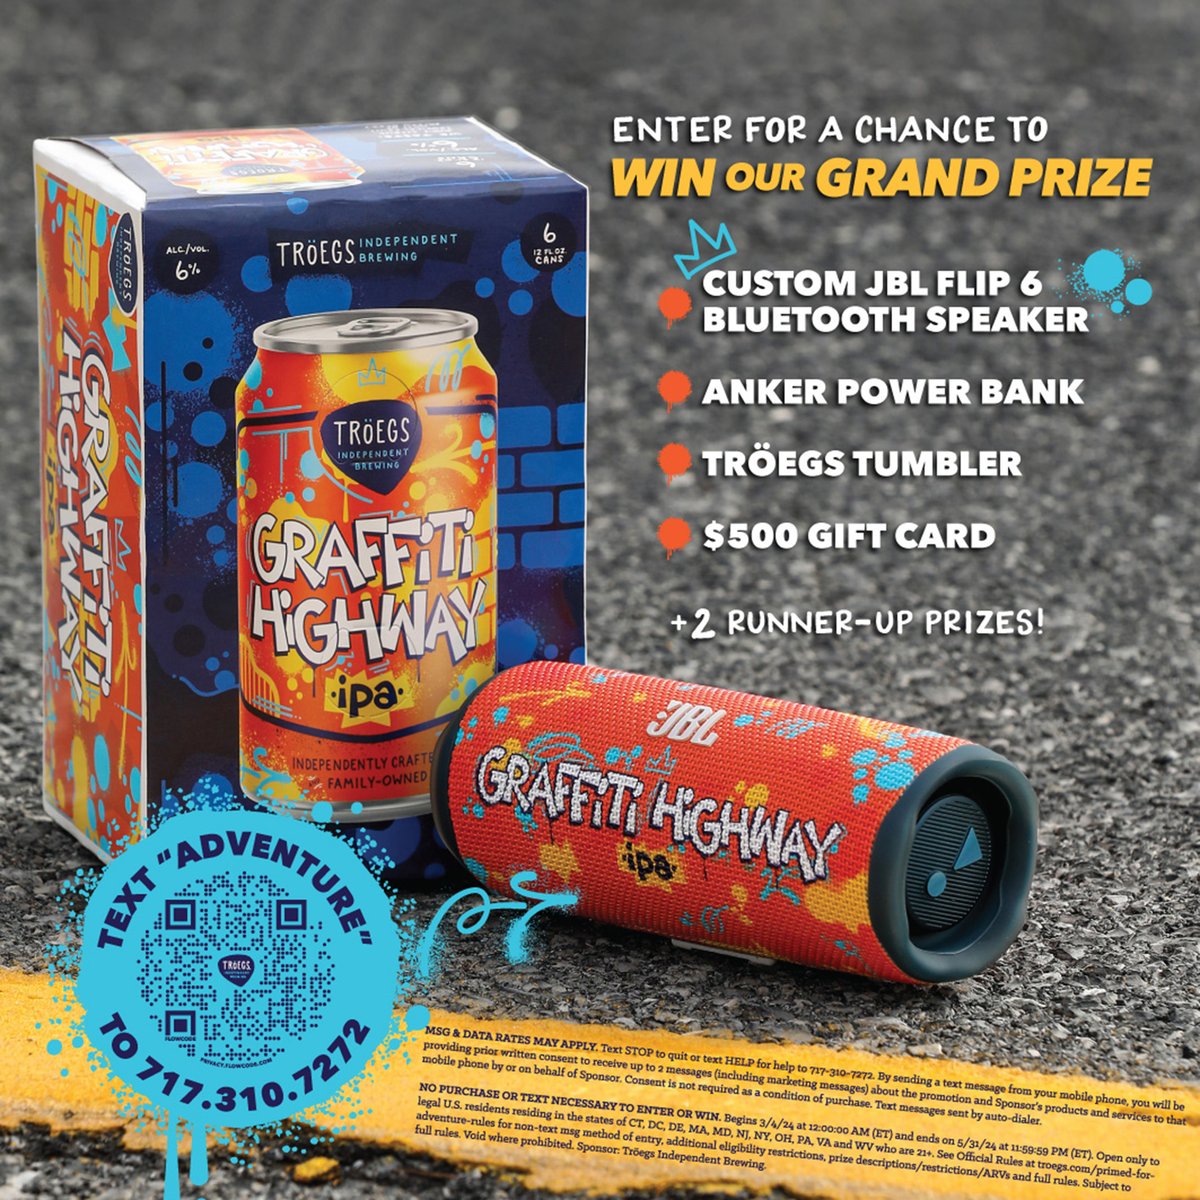 You still have time to enter our #PrimedforAdventure Giveaway. The grand prize is a #GraffitiHighway JBL Speaker, $500 gift card, Tröegs tumbler & Anker power bank. Best of all, it's simple. Text “ADVENTURE” to 717-310-7272. Contest rules at troegs.com/primed-for-adv…. #Troegs